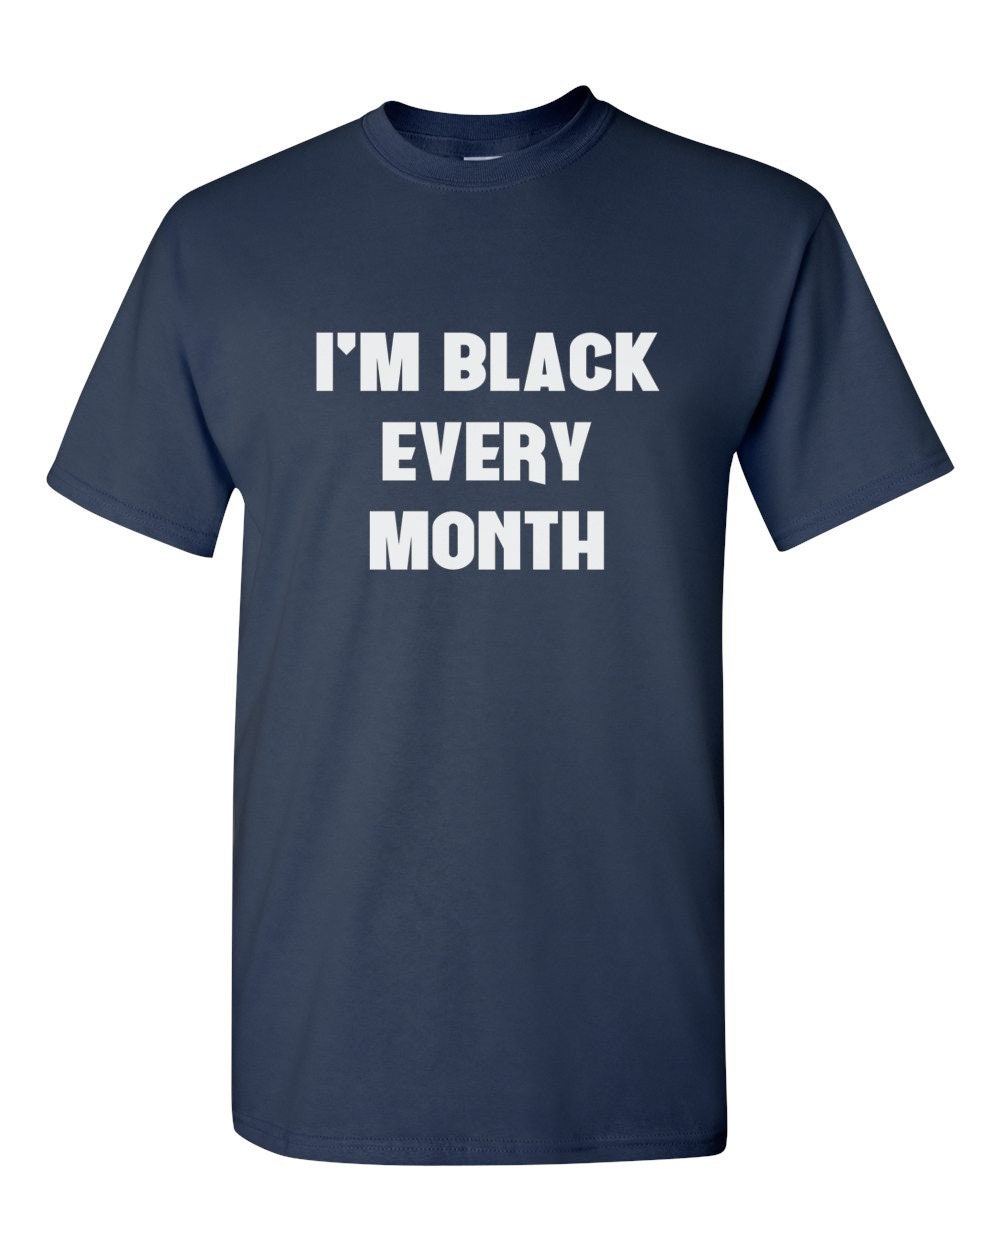 Black History Month Black Lives Matter I'm Black Every Month Shirt Justice Freedom Tee Civil Rights T-Shirt